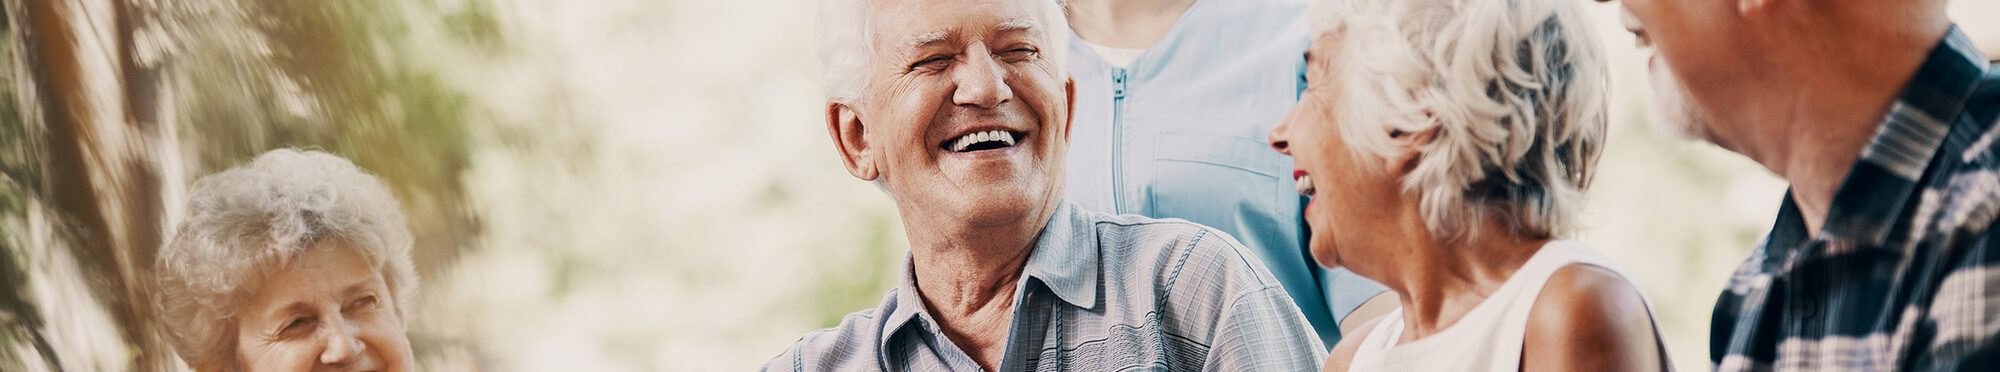 Happy elderly man with walking stick and smiling senior people r